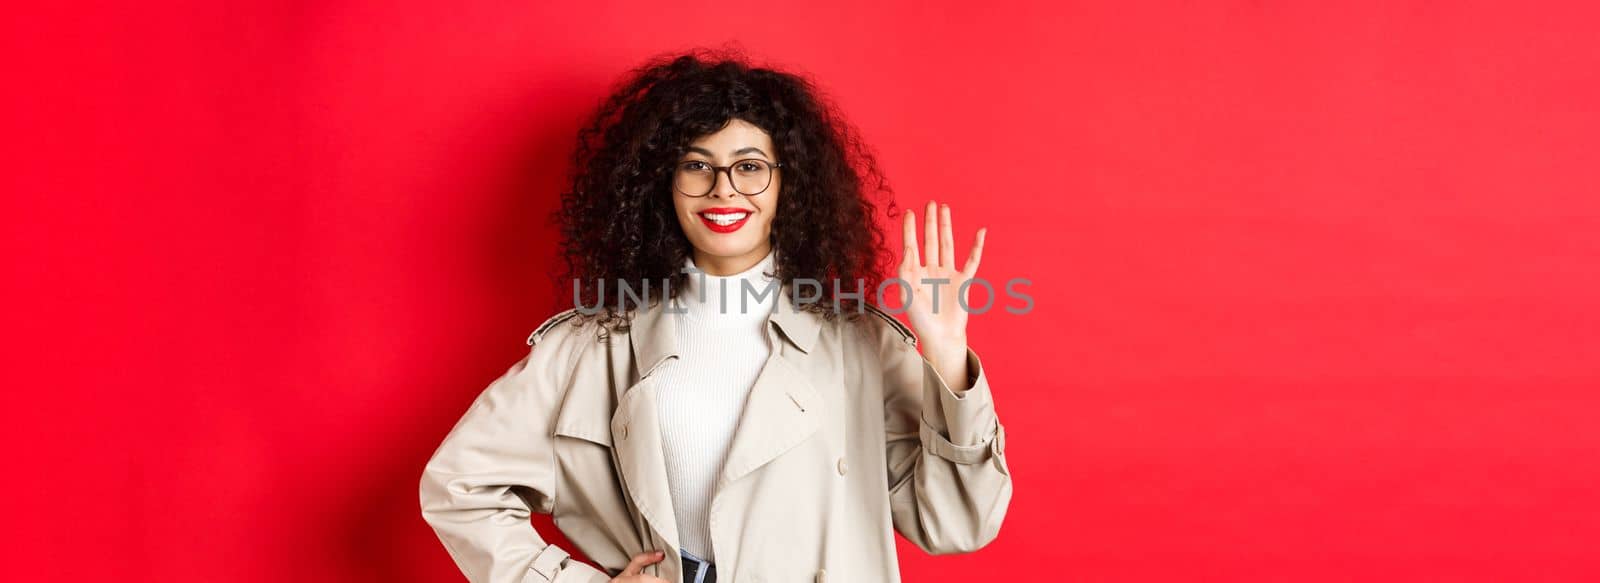 Stylish european woman in glasses and trench coat, waiving hand and smiling, saying hello, greeting someone, standing on red background.